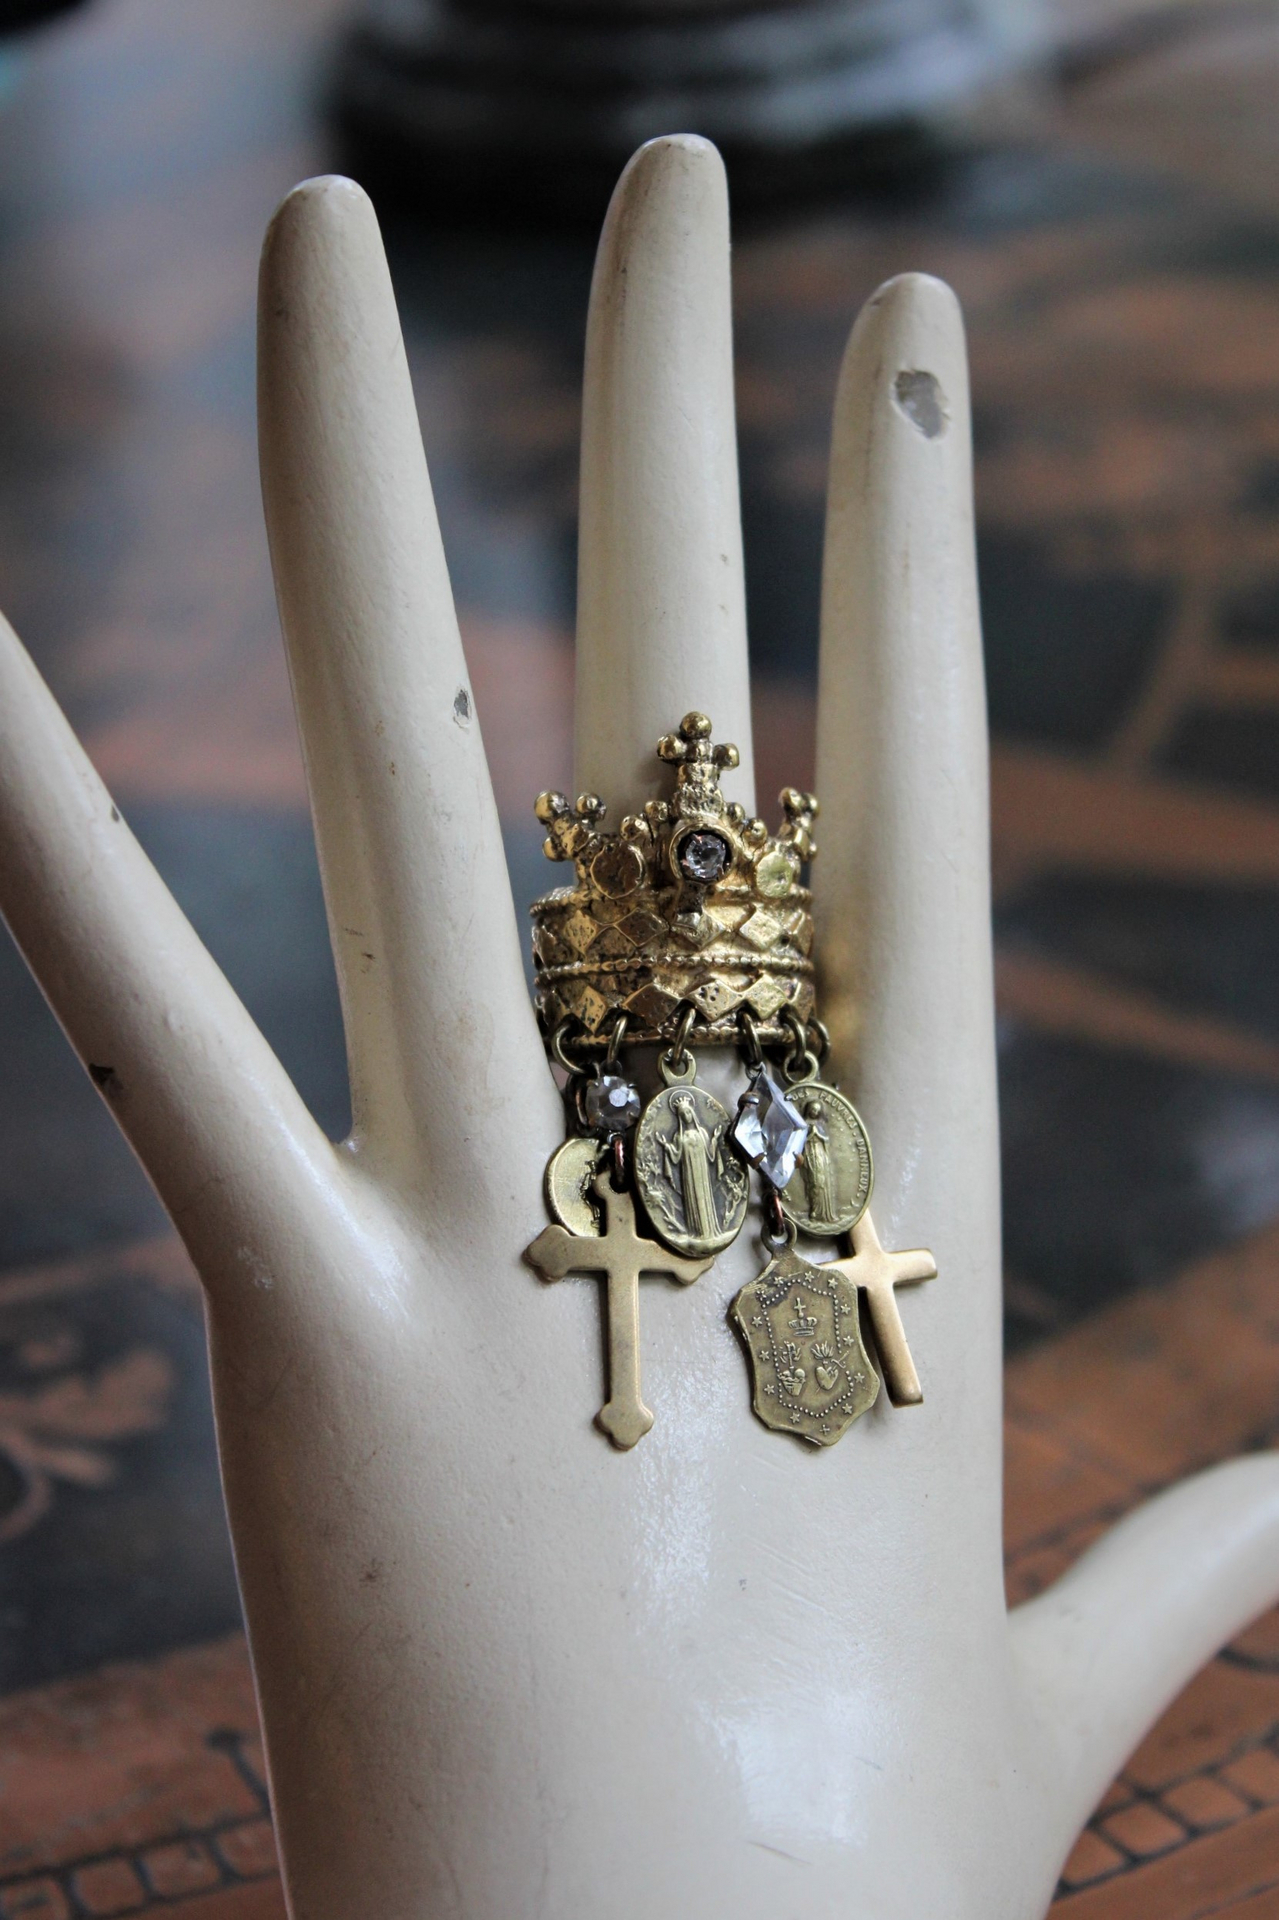 Antique Gilt Crown Ring with Antique French Medals, Antique Crosses, Antique Faceted Rock Crystals - Size 9 